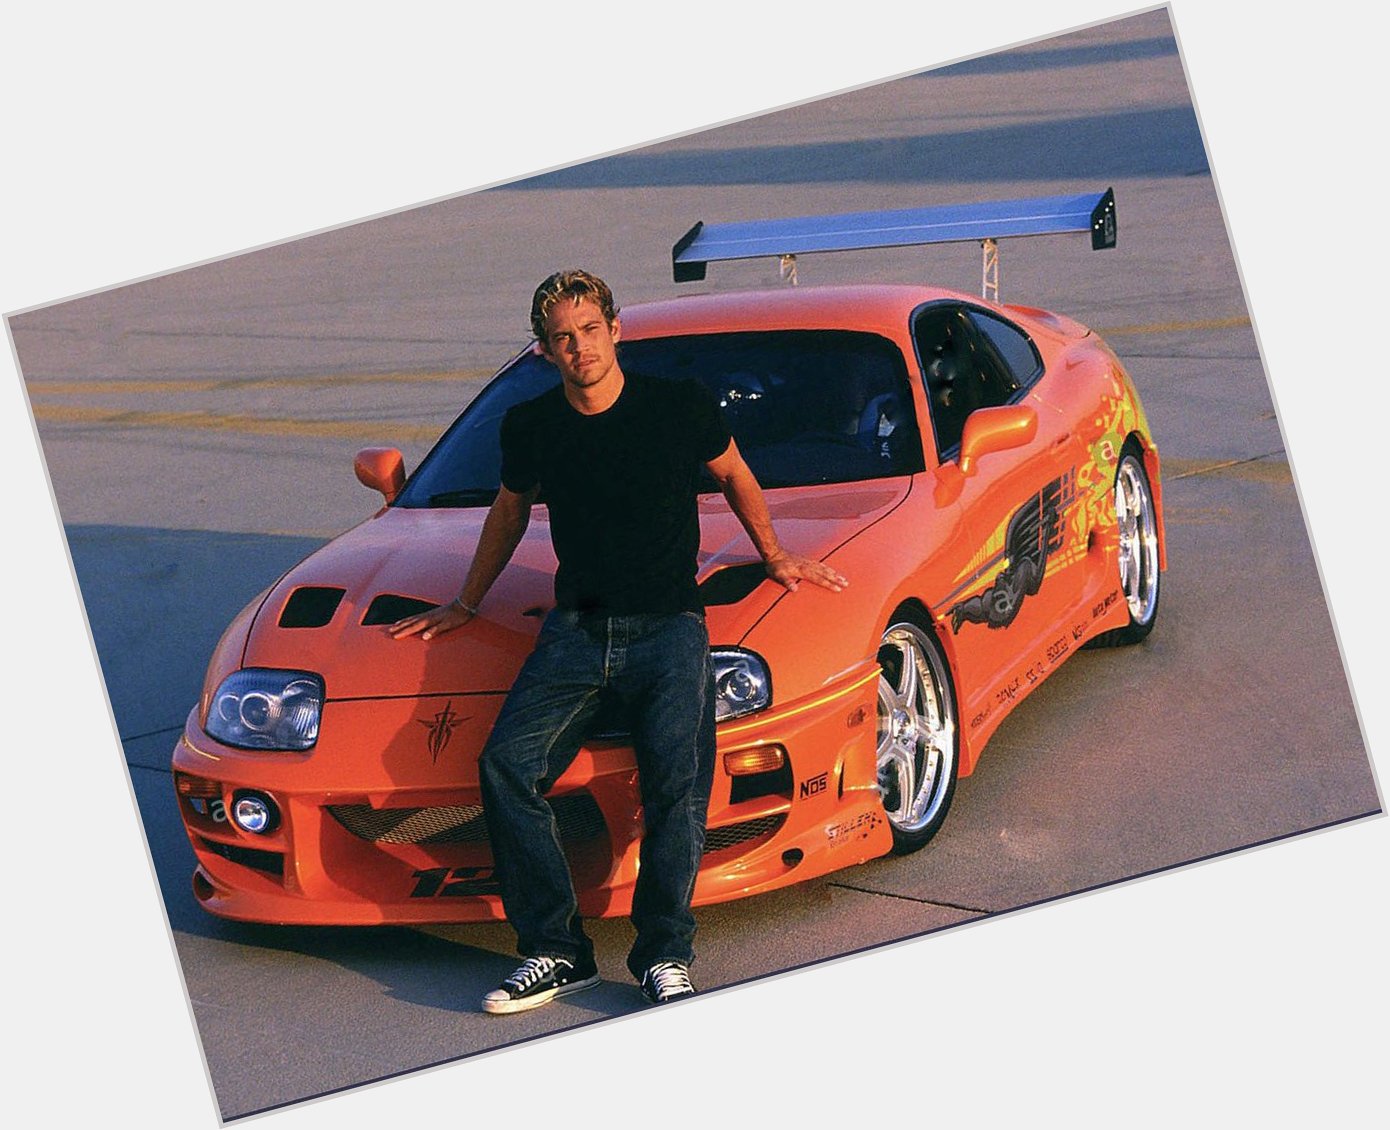 Happy Birthday, Paul Walker! He would ve been 45 today. We all miss you 